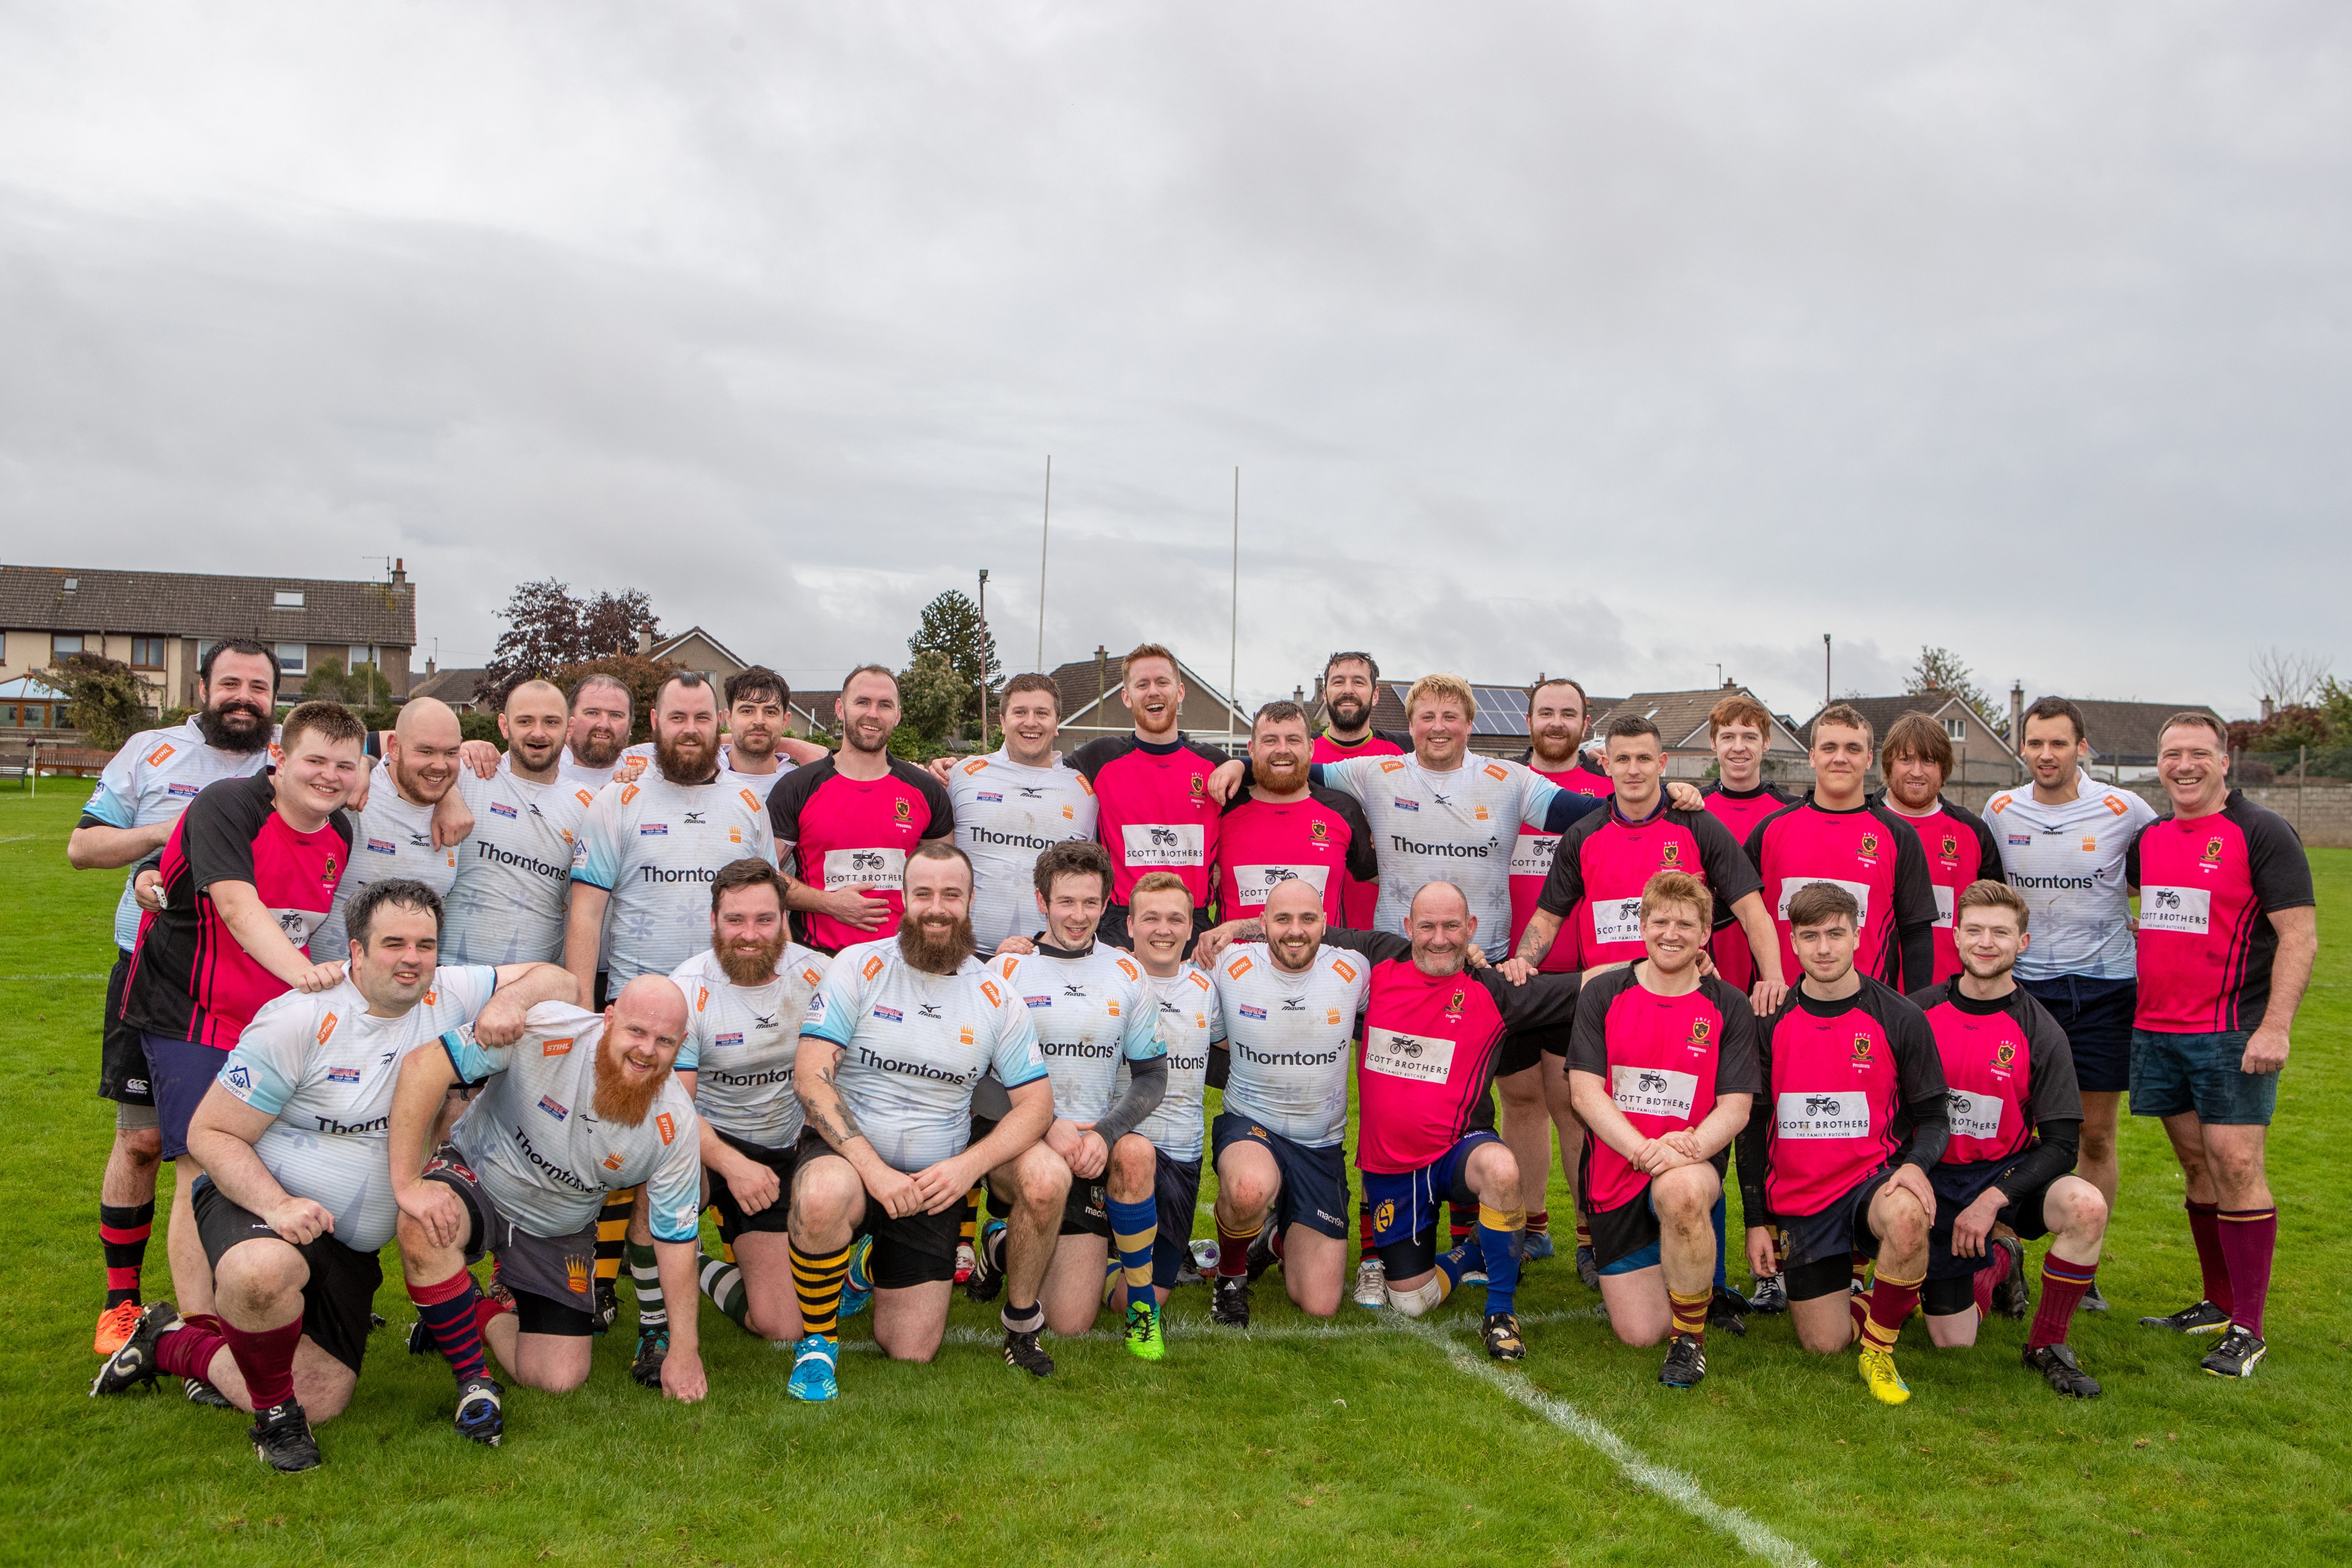 Both teams pose for a photo following Saturday's match.